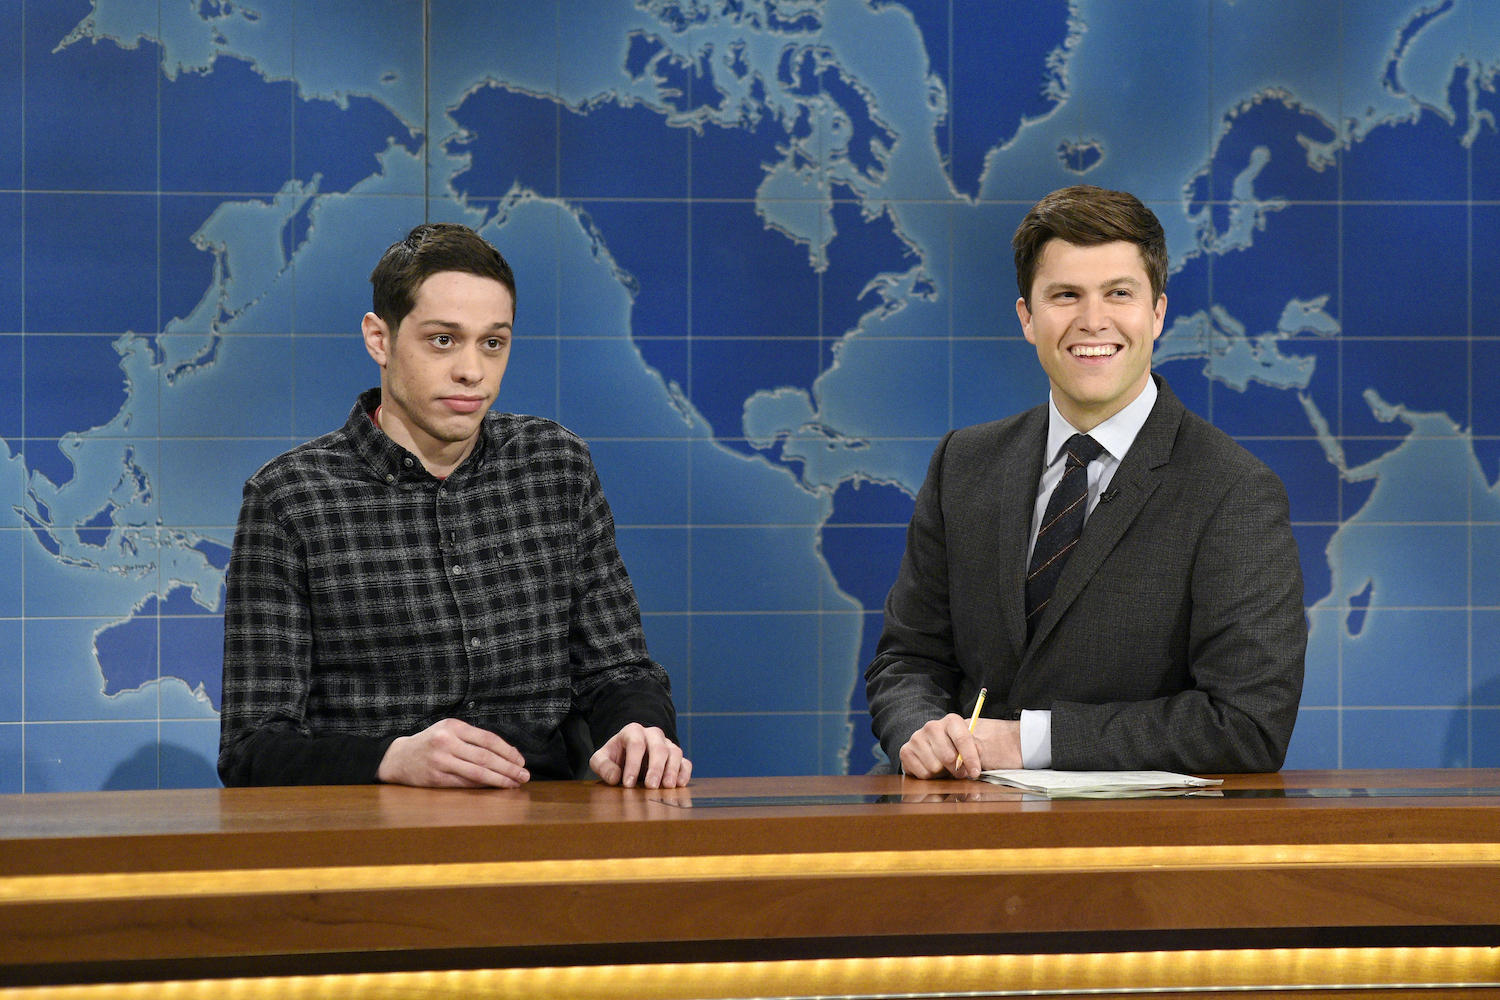 Pete Davidson on 'SNL' with Colin Jost during Weekend Update